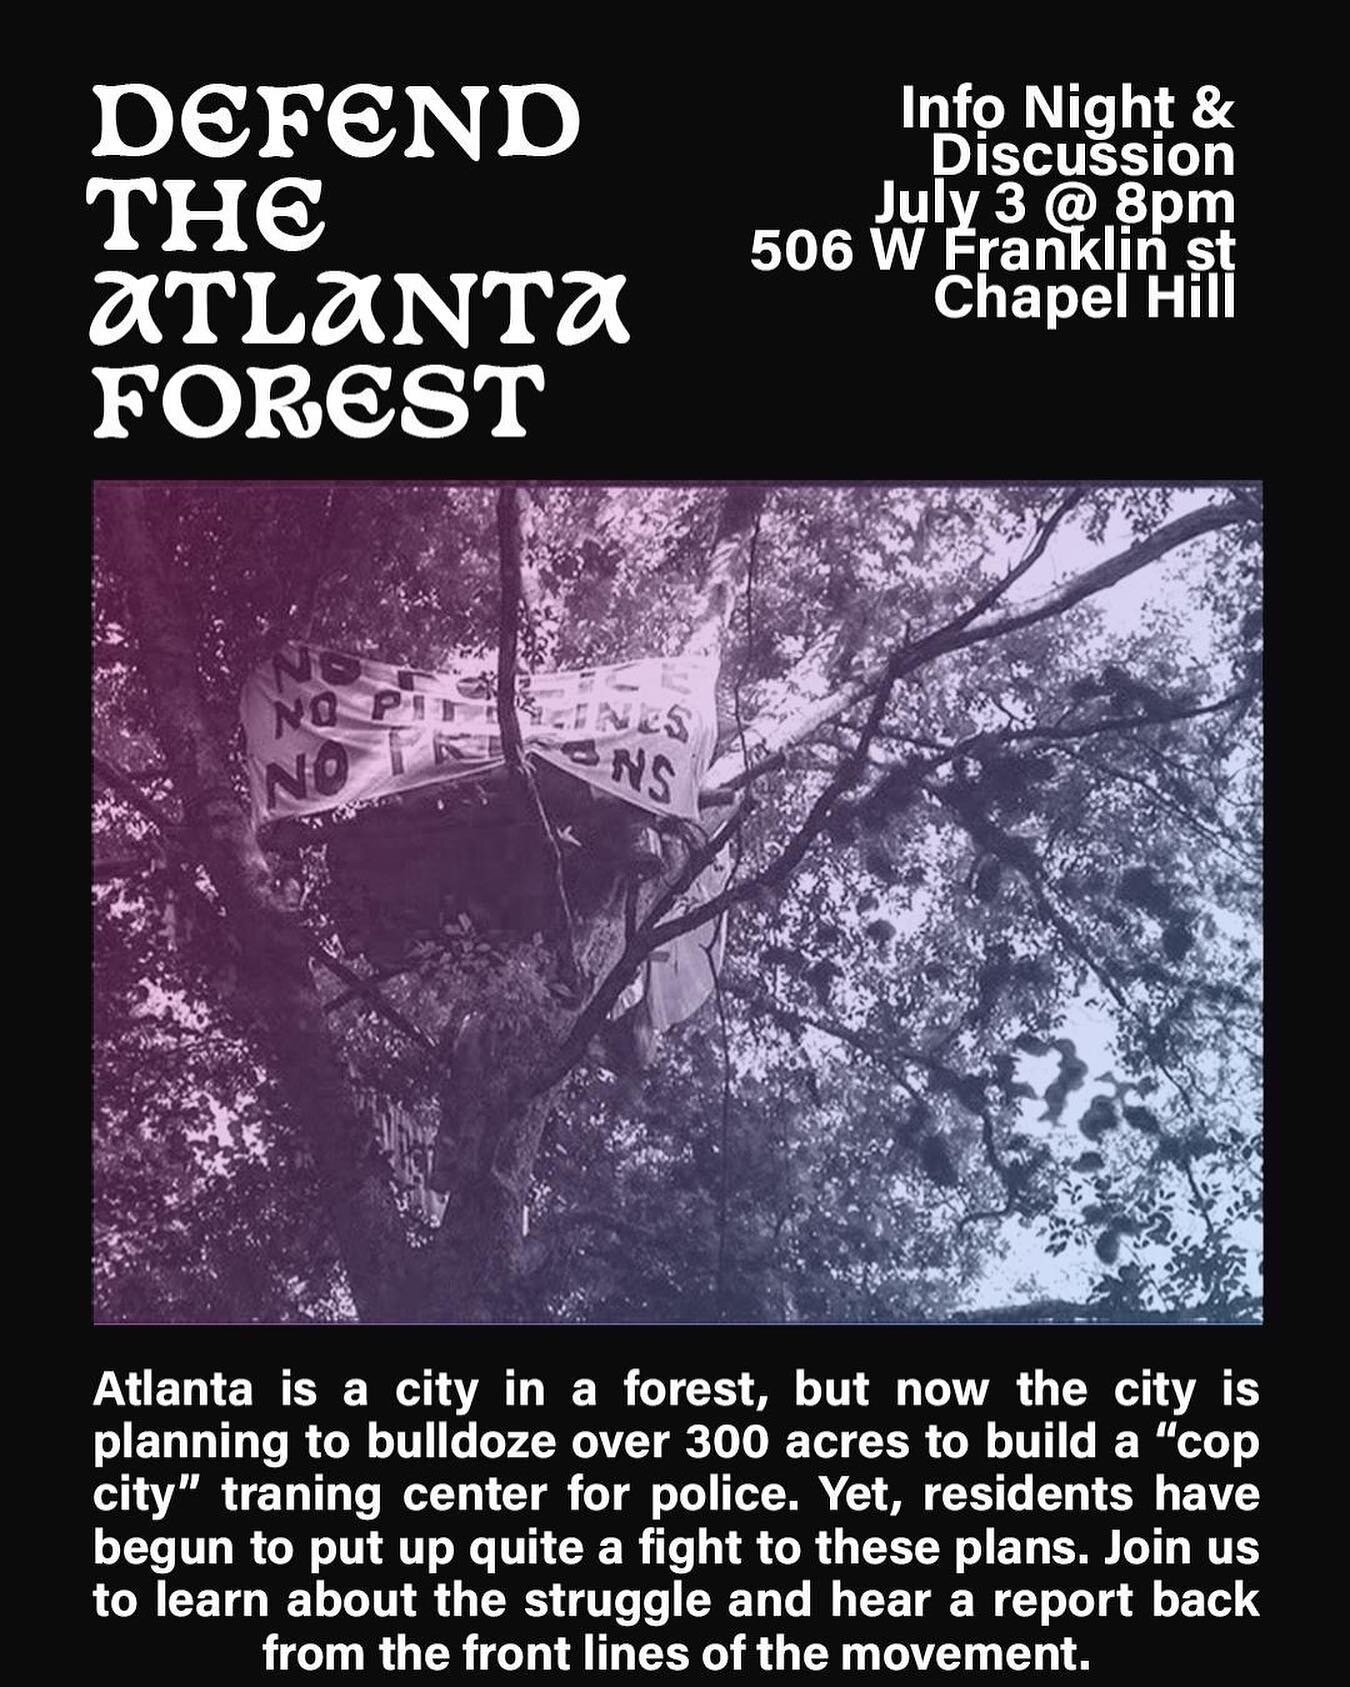 BASEMENT supports local efforts to educate our communities! Especially in the arts and in the interconnected regional issues that impact us all. We hope to see you at this important event tomorrow, Sunday, July 3! 

Defend the Atlanta Forest
Triangle